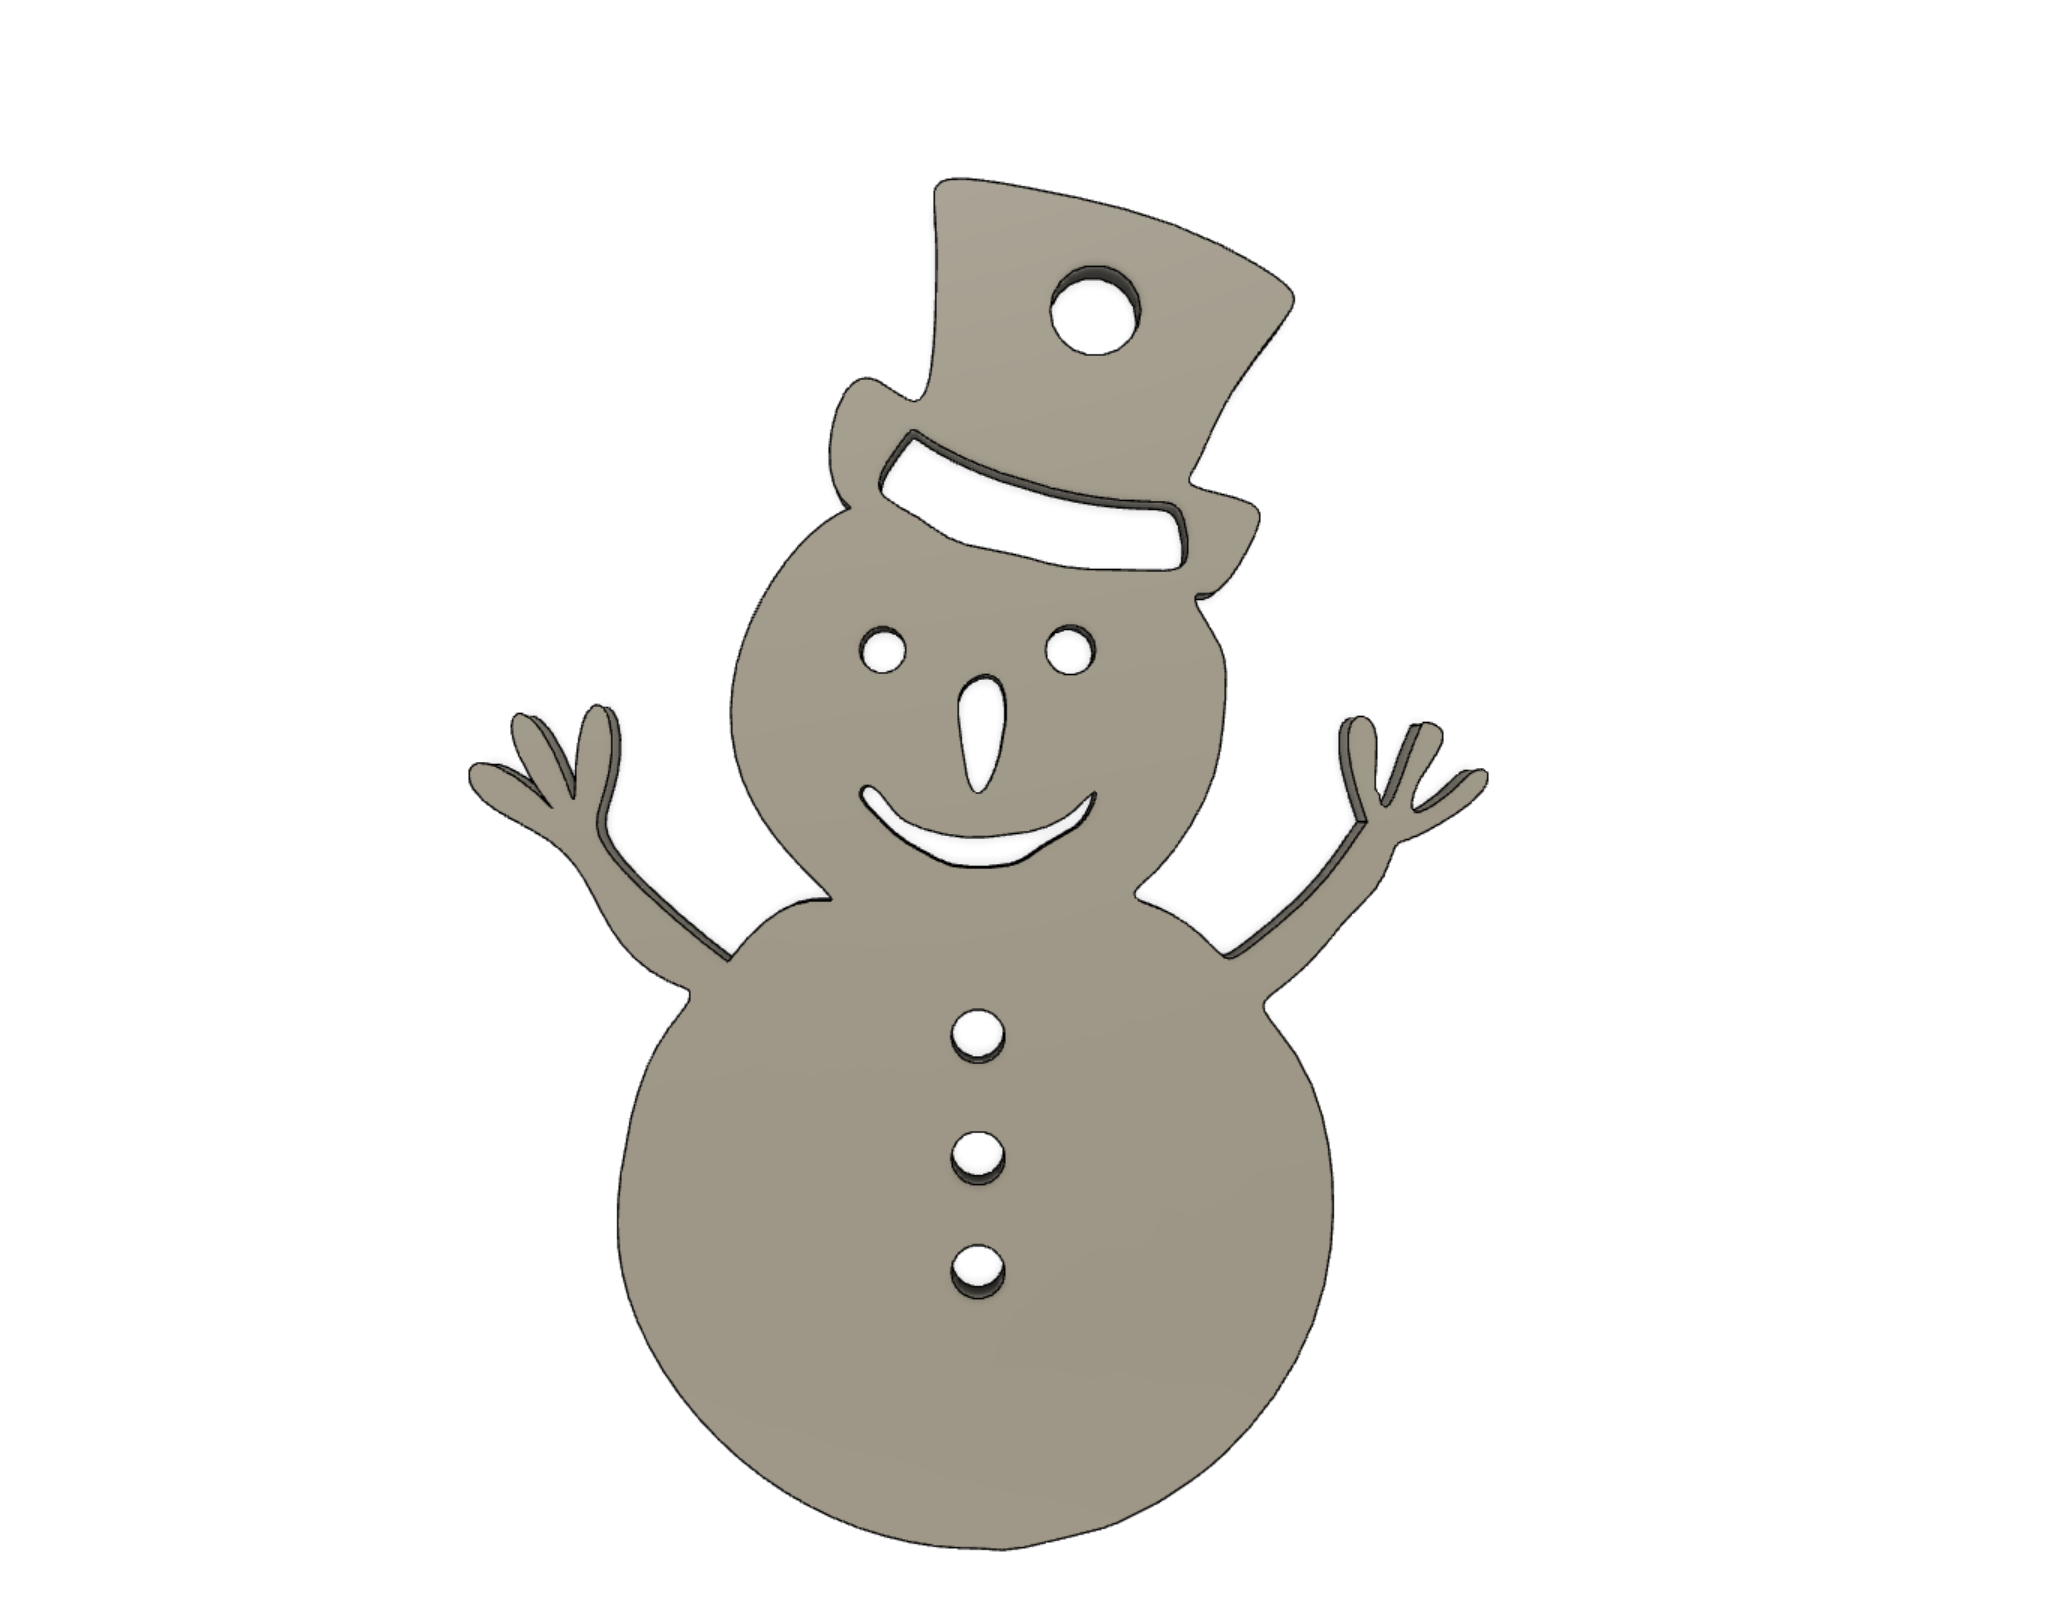 Snowman Christmas Ornament by Cozmo77 | Download free STL model ...